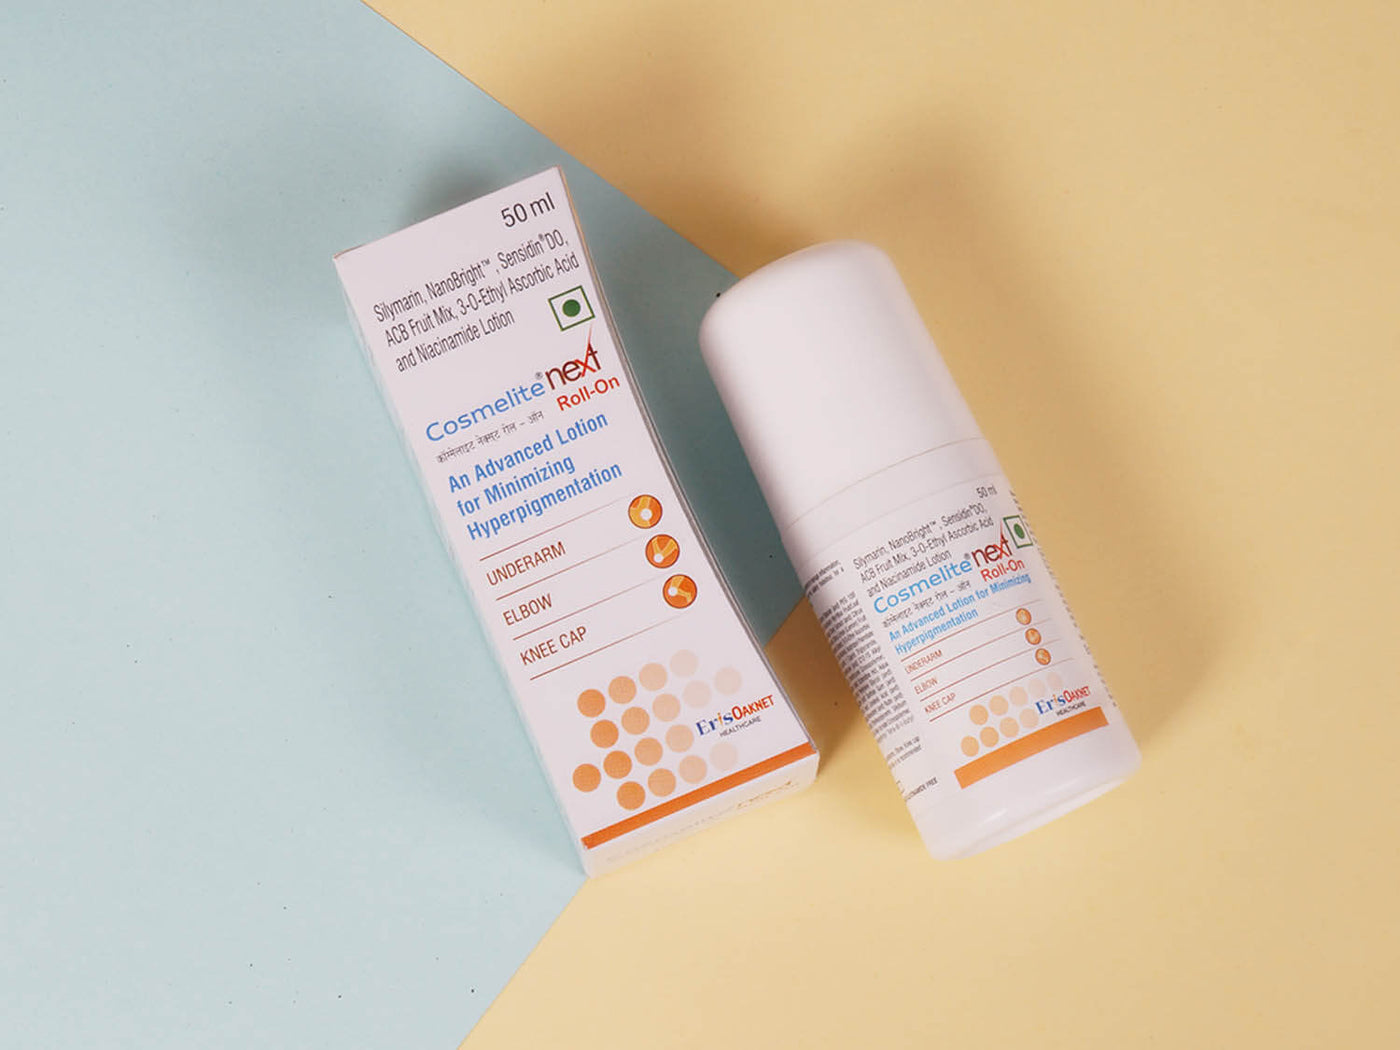 Cosmelite Next Roll-On Lotion - Clinikally